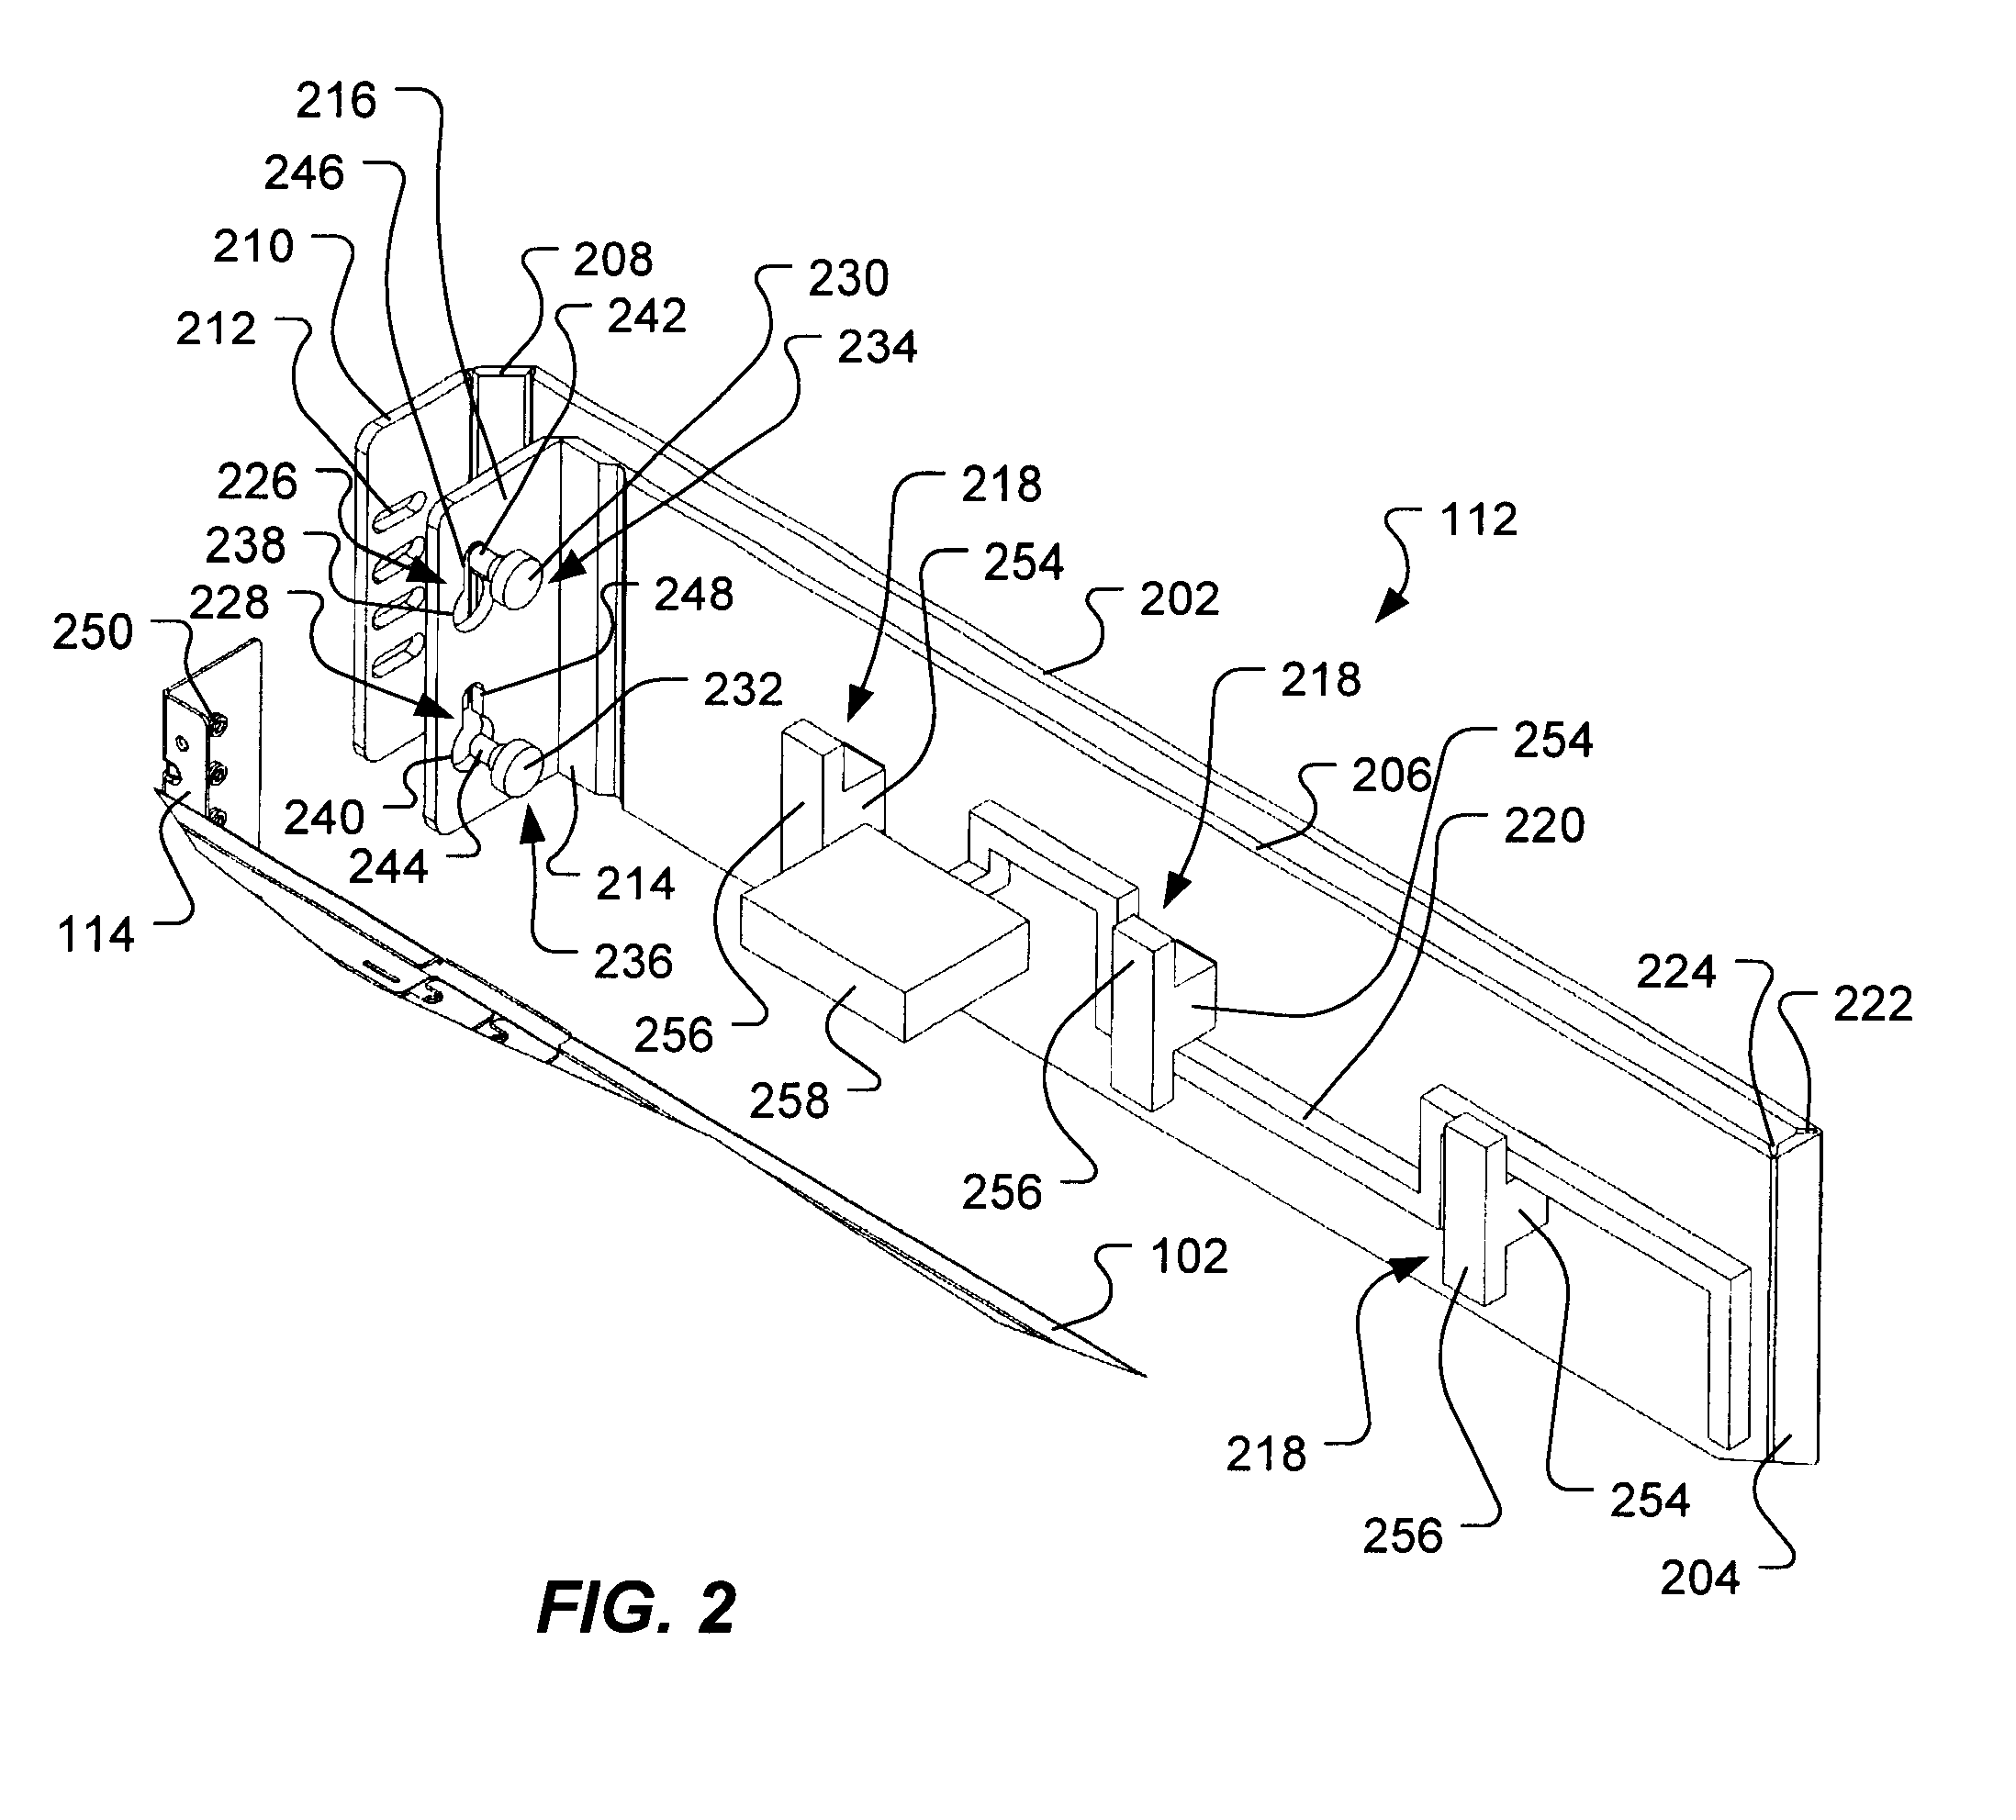 Apparatus and method for routing cables